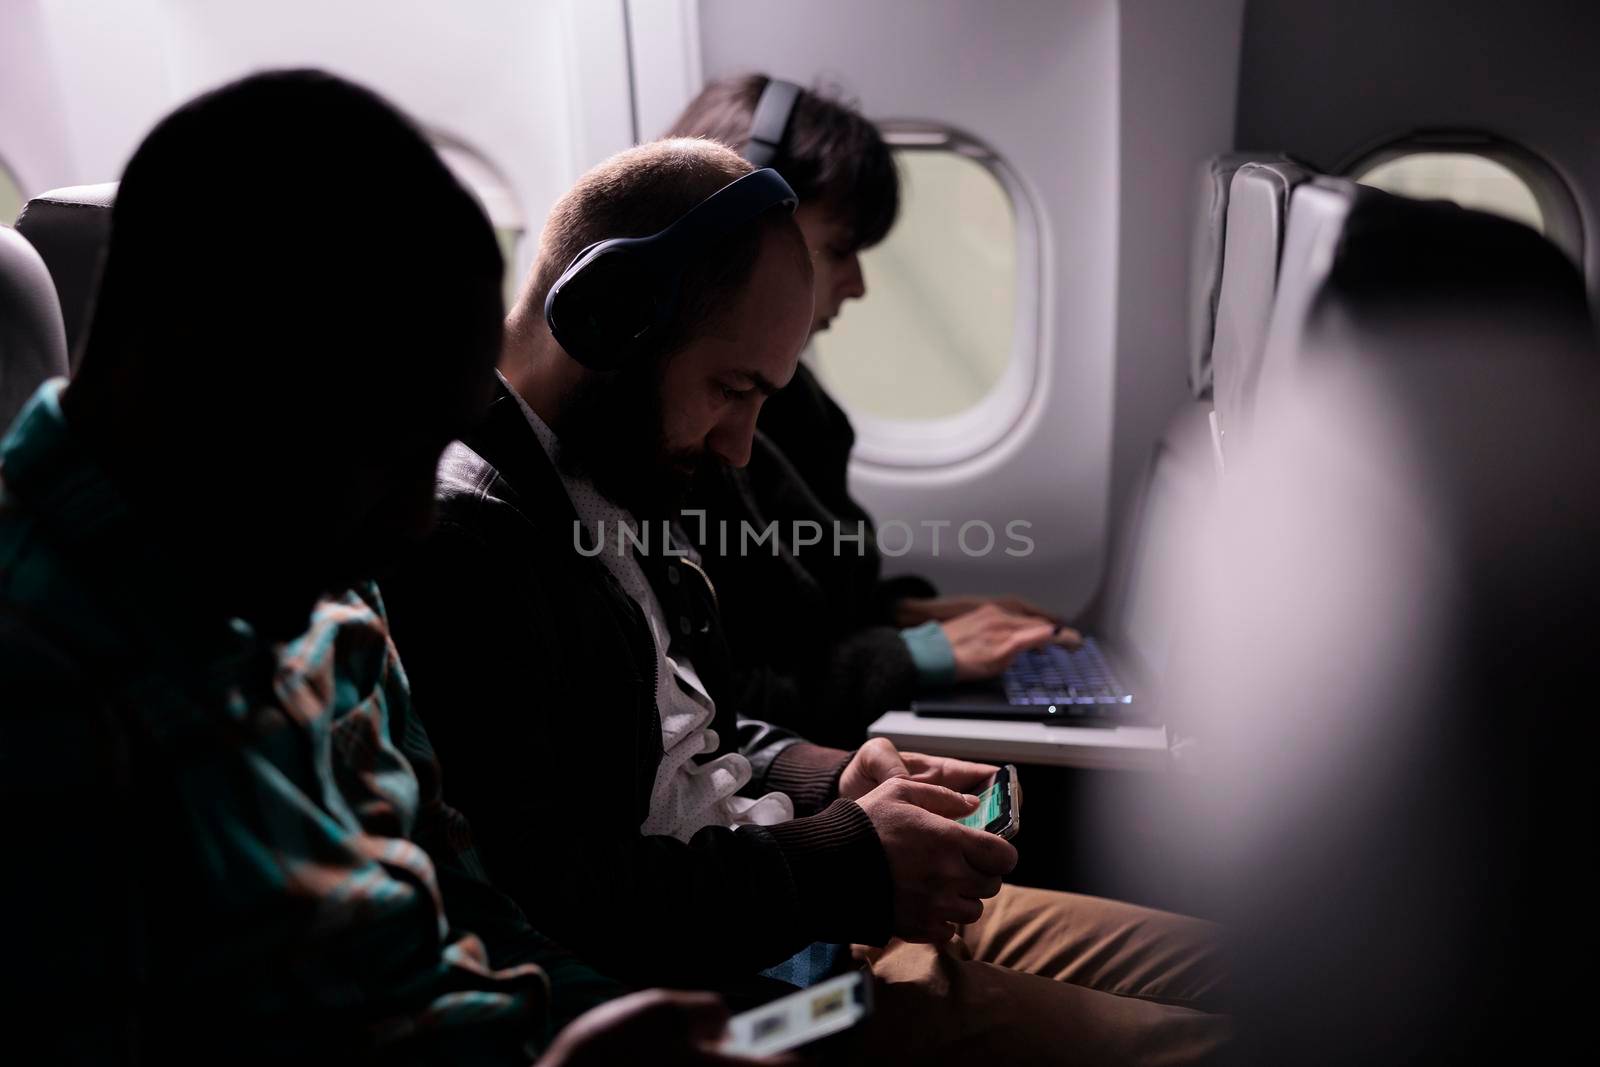 Diverse tourists flying in economy class with airplane, travelling on business work trip or holiday destination. Using laptop and phone on plane flight, fly international airways.